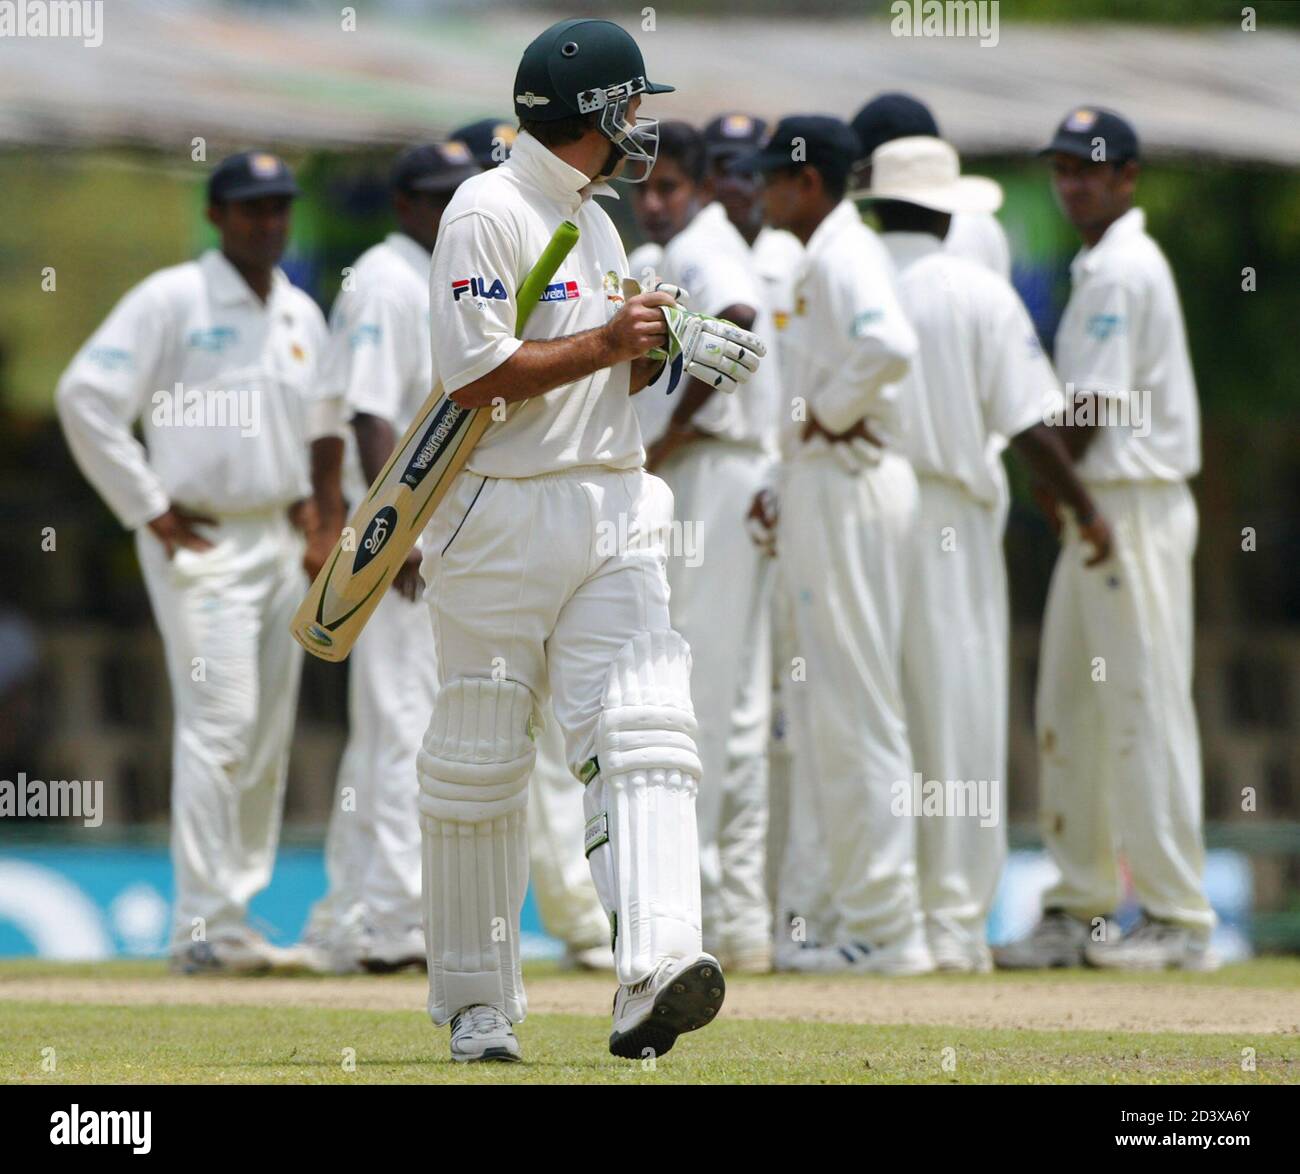 THE SRI LANKAN TEAM CELEBRATES AFTER DISMISSING AUSTRALIA'S CAPTAIN PONTING DURING THE FIRST DAY OF THE SECOND TEST IN KANDY.  The Sri Lankan team celebrates as Australia's captain Ricky Ponting (C) looks back at the umpire after being given out LBW for ten runs during the first day of the second test at Asgiriya Sportsground in Kandy March 16, 2004. Ponting elected to bat in the second test against Sri Lanka on Tuesday. REUTERS/David Gray Stock Photo